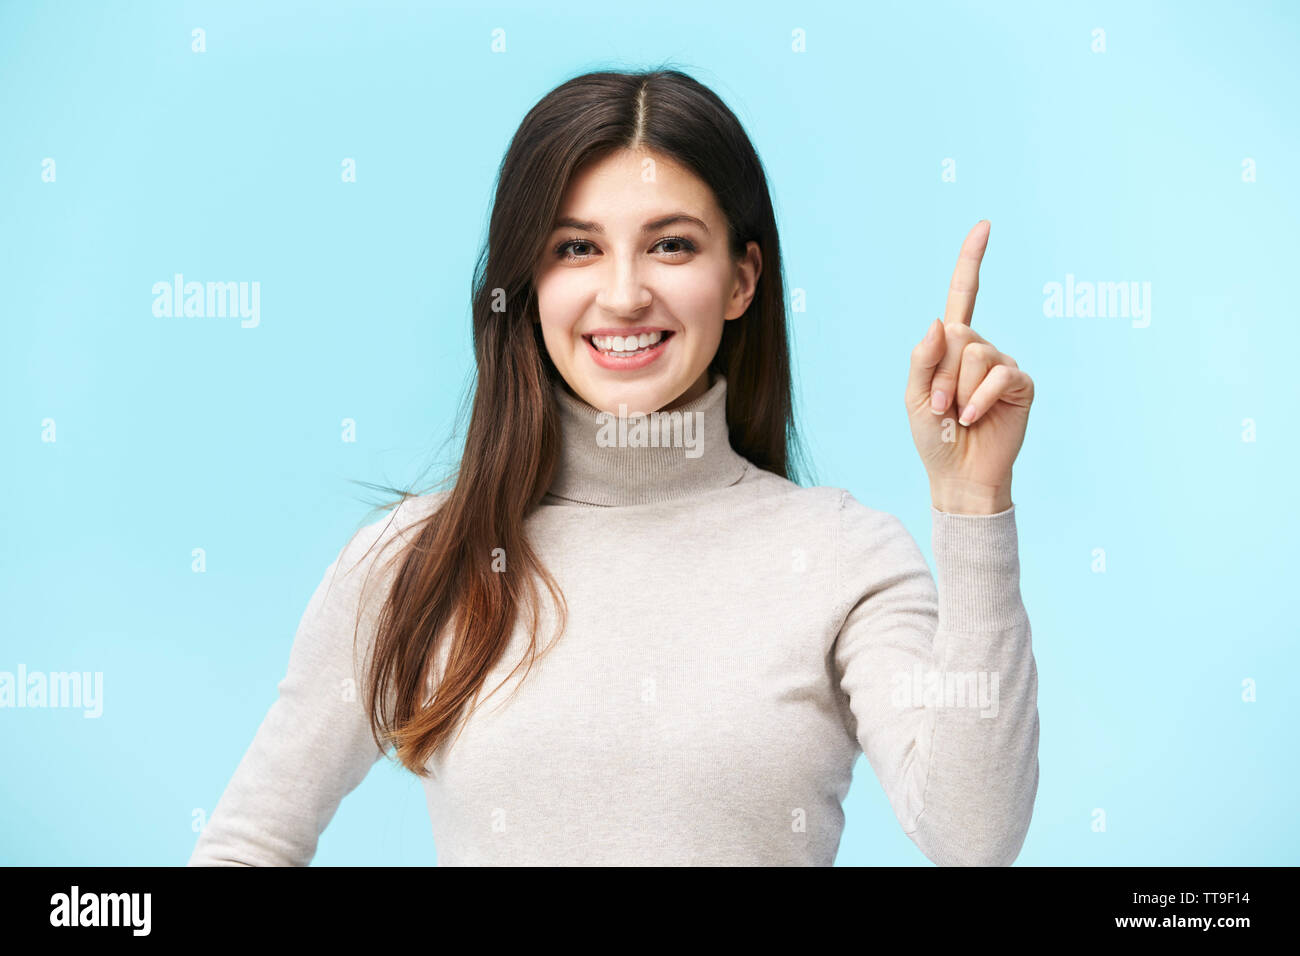 beautiful young caucasian woman showing a number one sign, looking at camera smiling, isolated on blue background Stock Photo